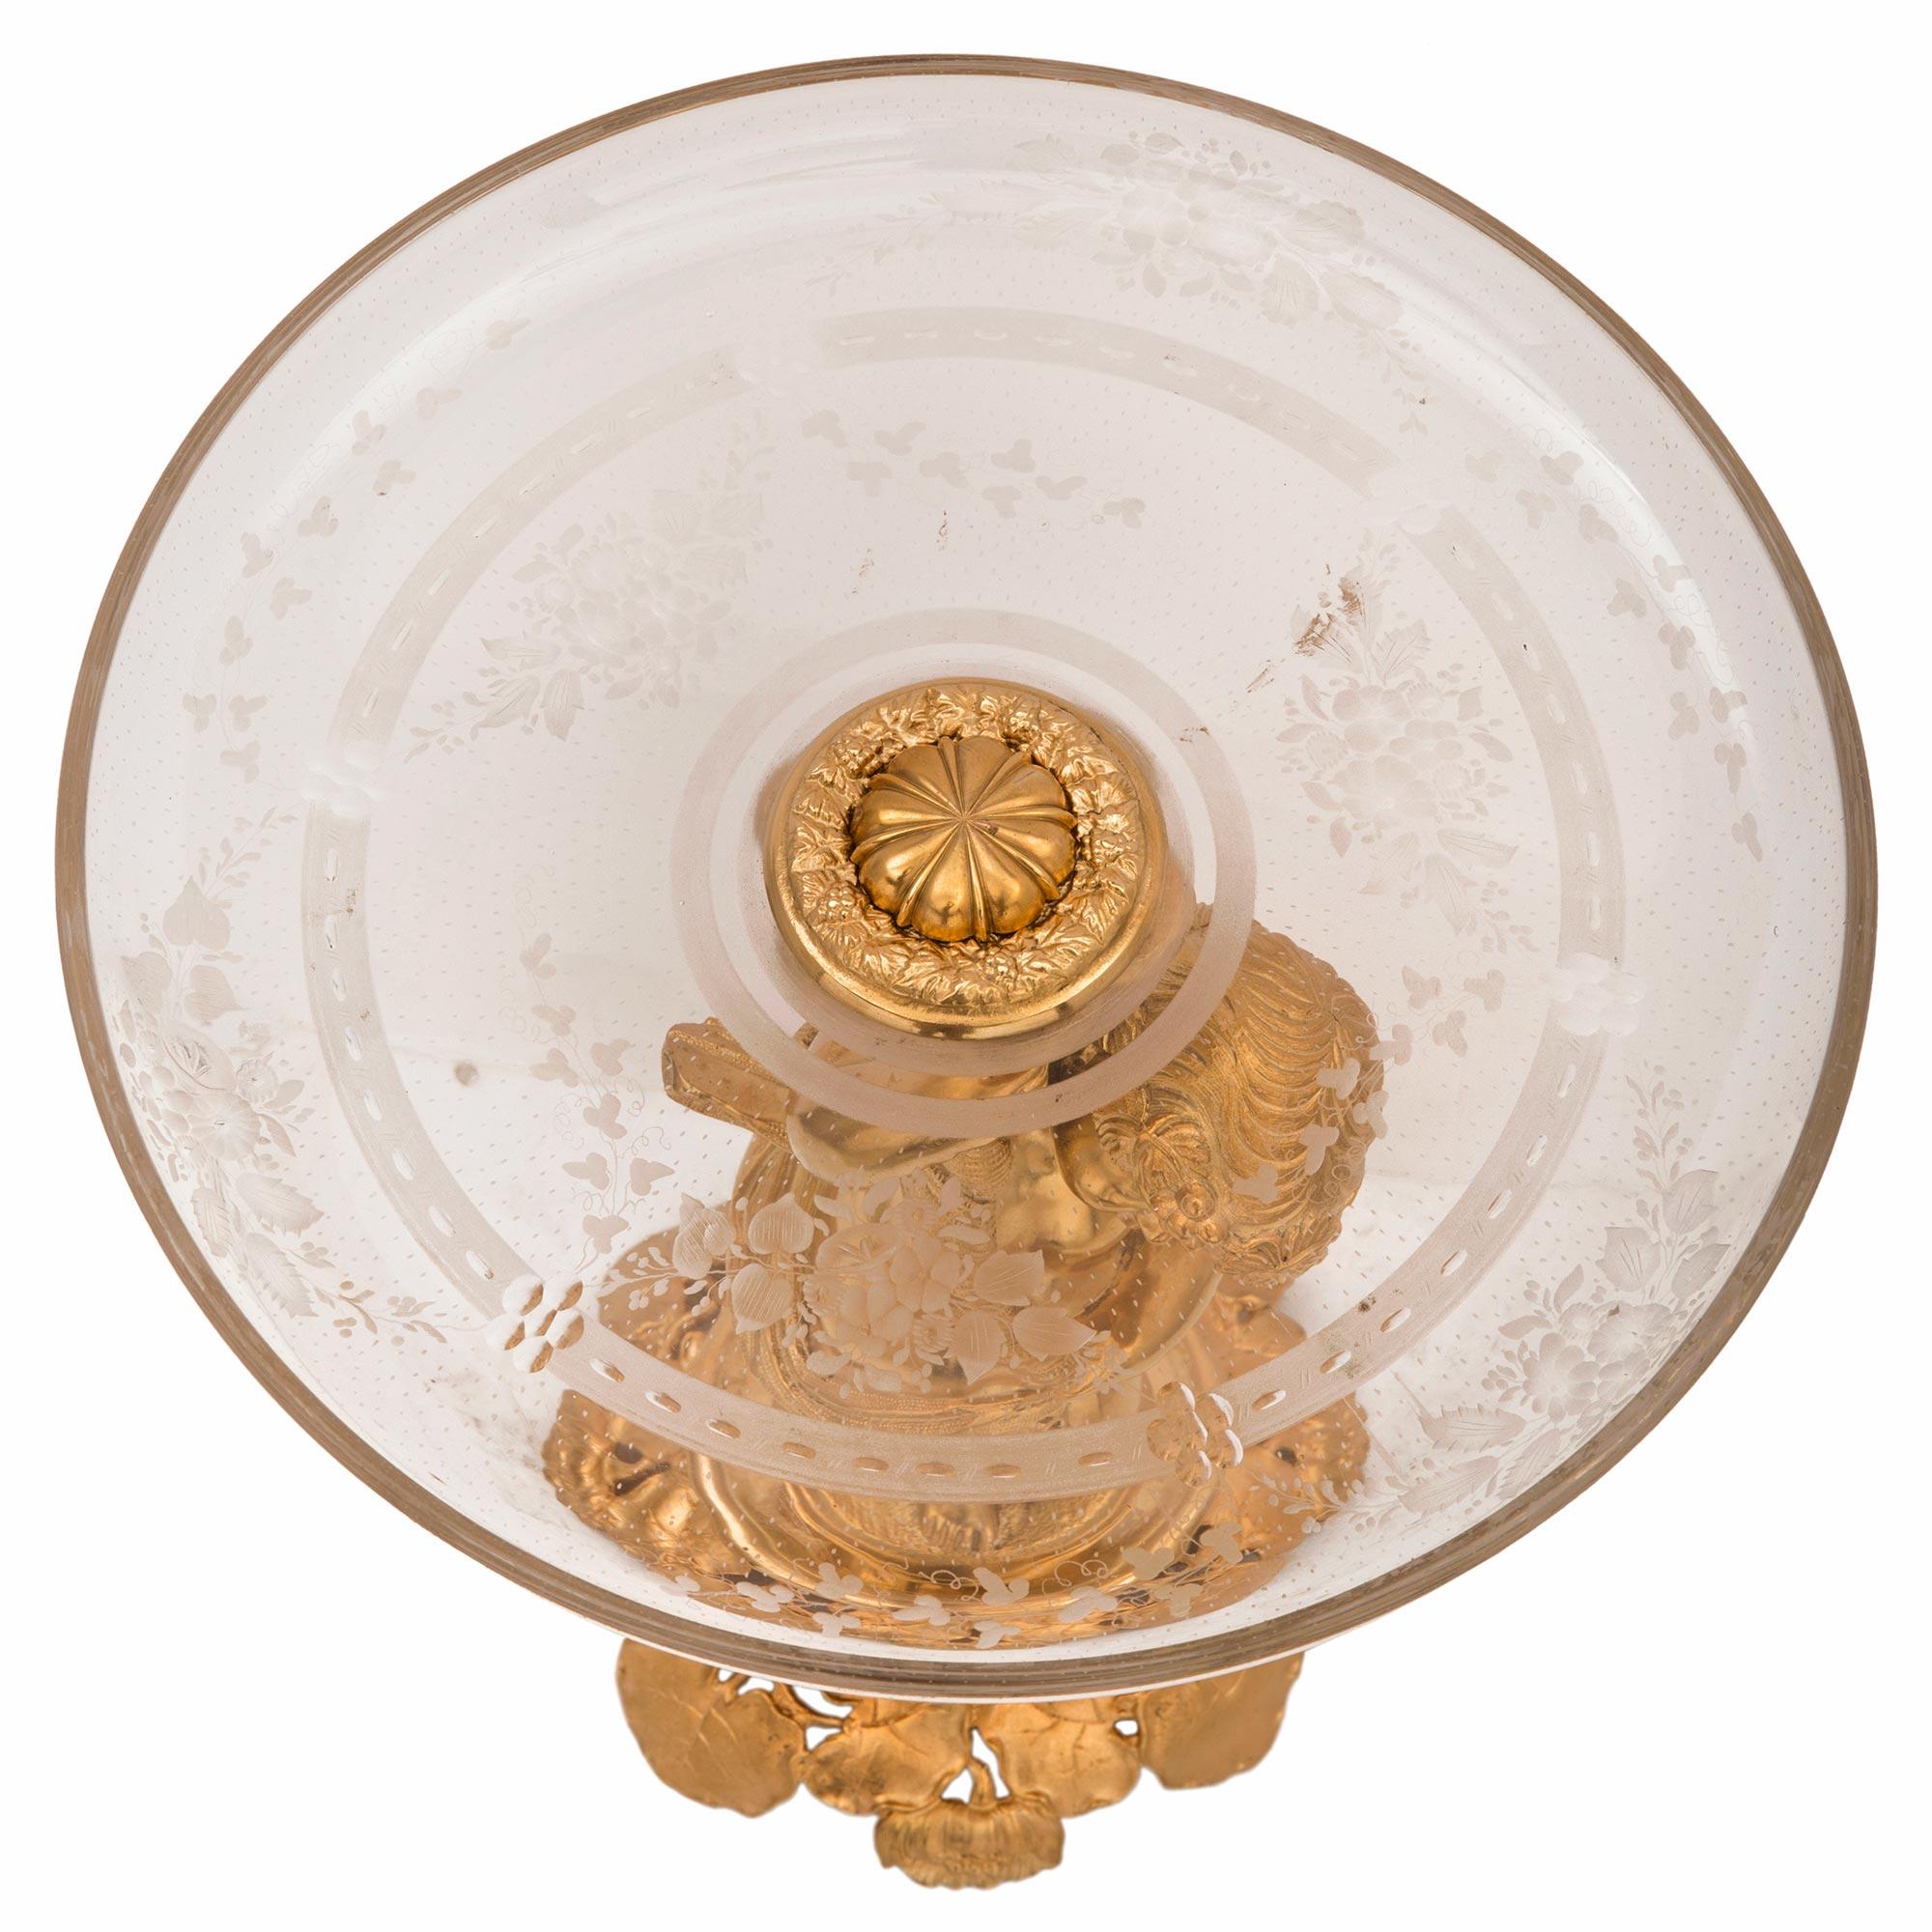 A charming and high quality French 19th century Louis XVI St. ormolu and Baccarat crystal presentoir centerpiece. The centerpiece is raised by a beautiful wonderfully executed pierced grape leaf designed base. At the center is the charming and